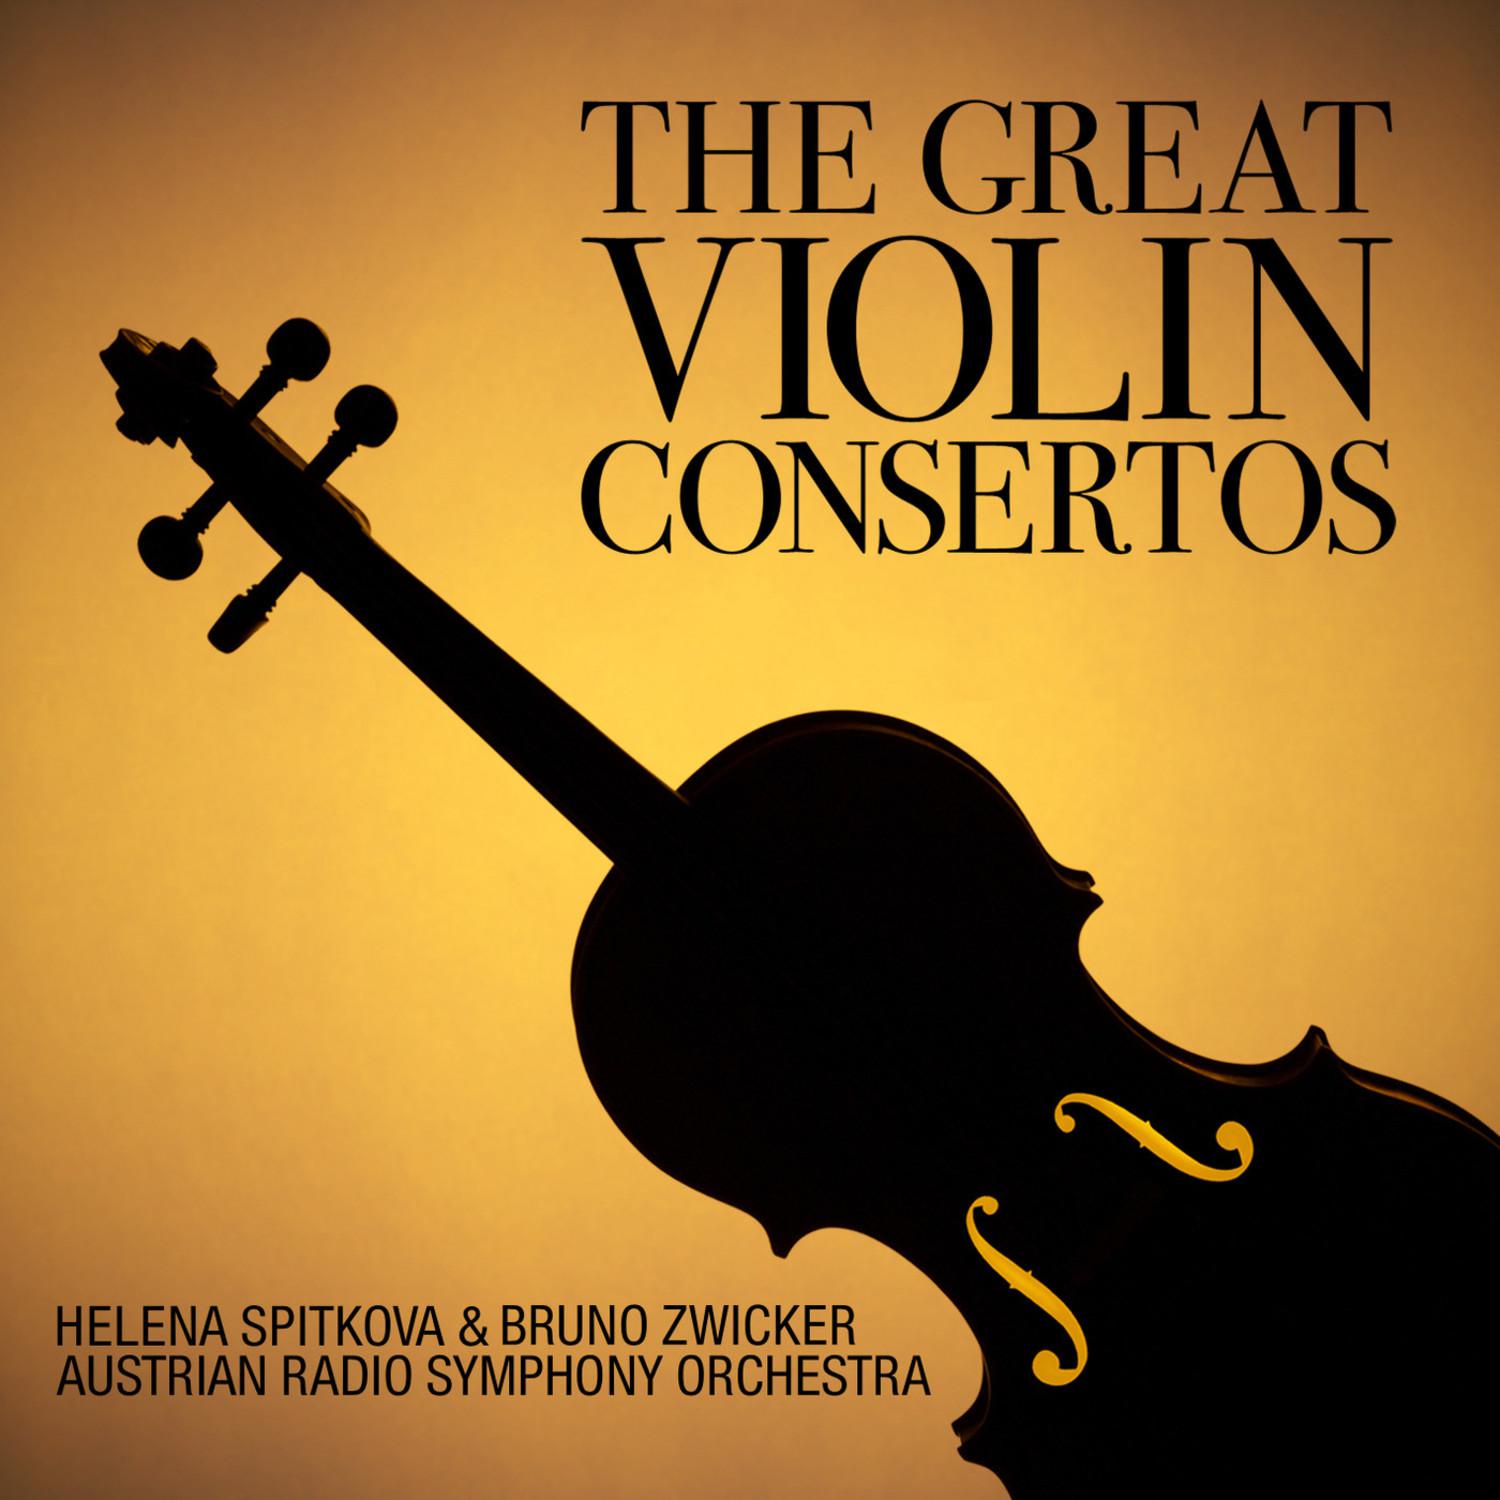 Concerto No. 2 in G Minor for Violin and Orchestra, Op. 63: II. Andante assai